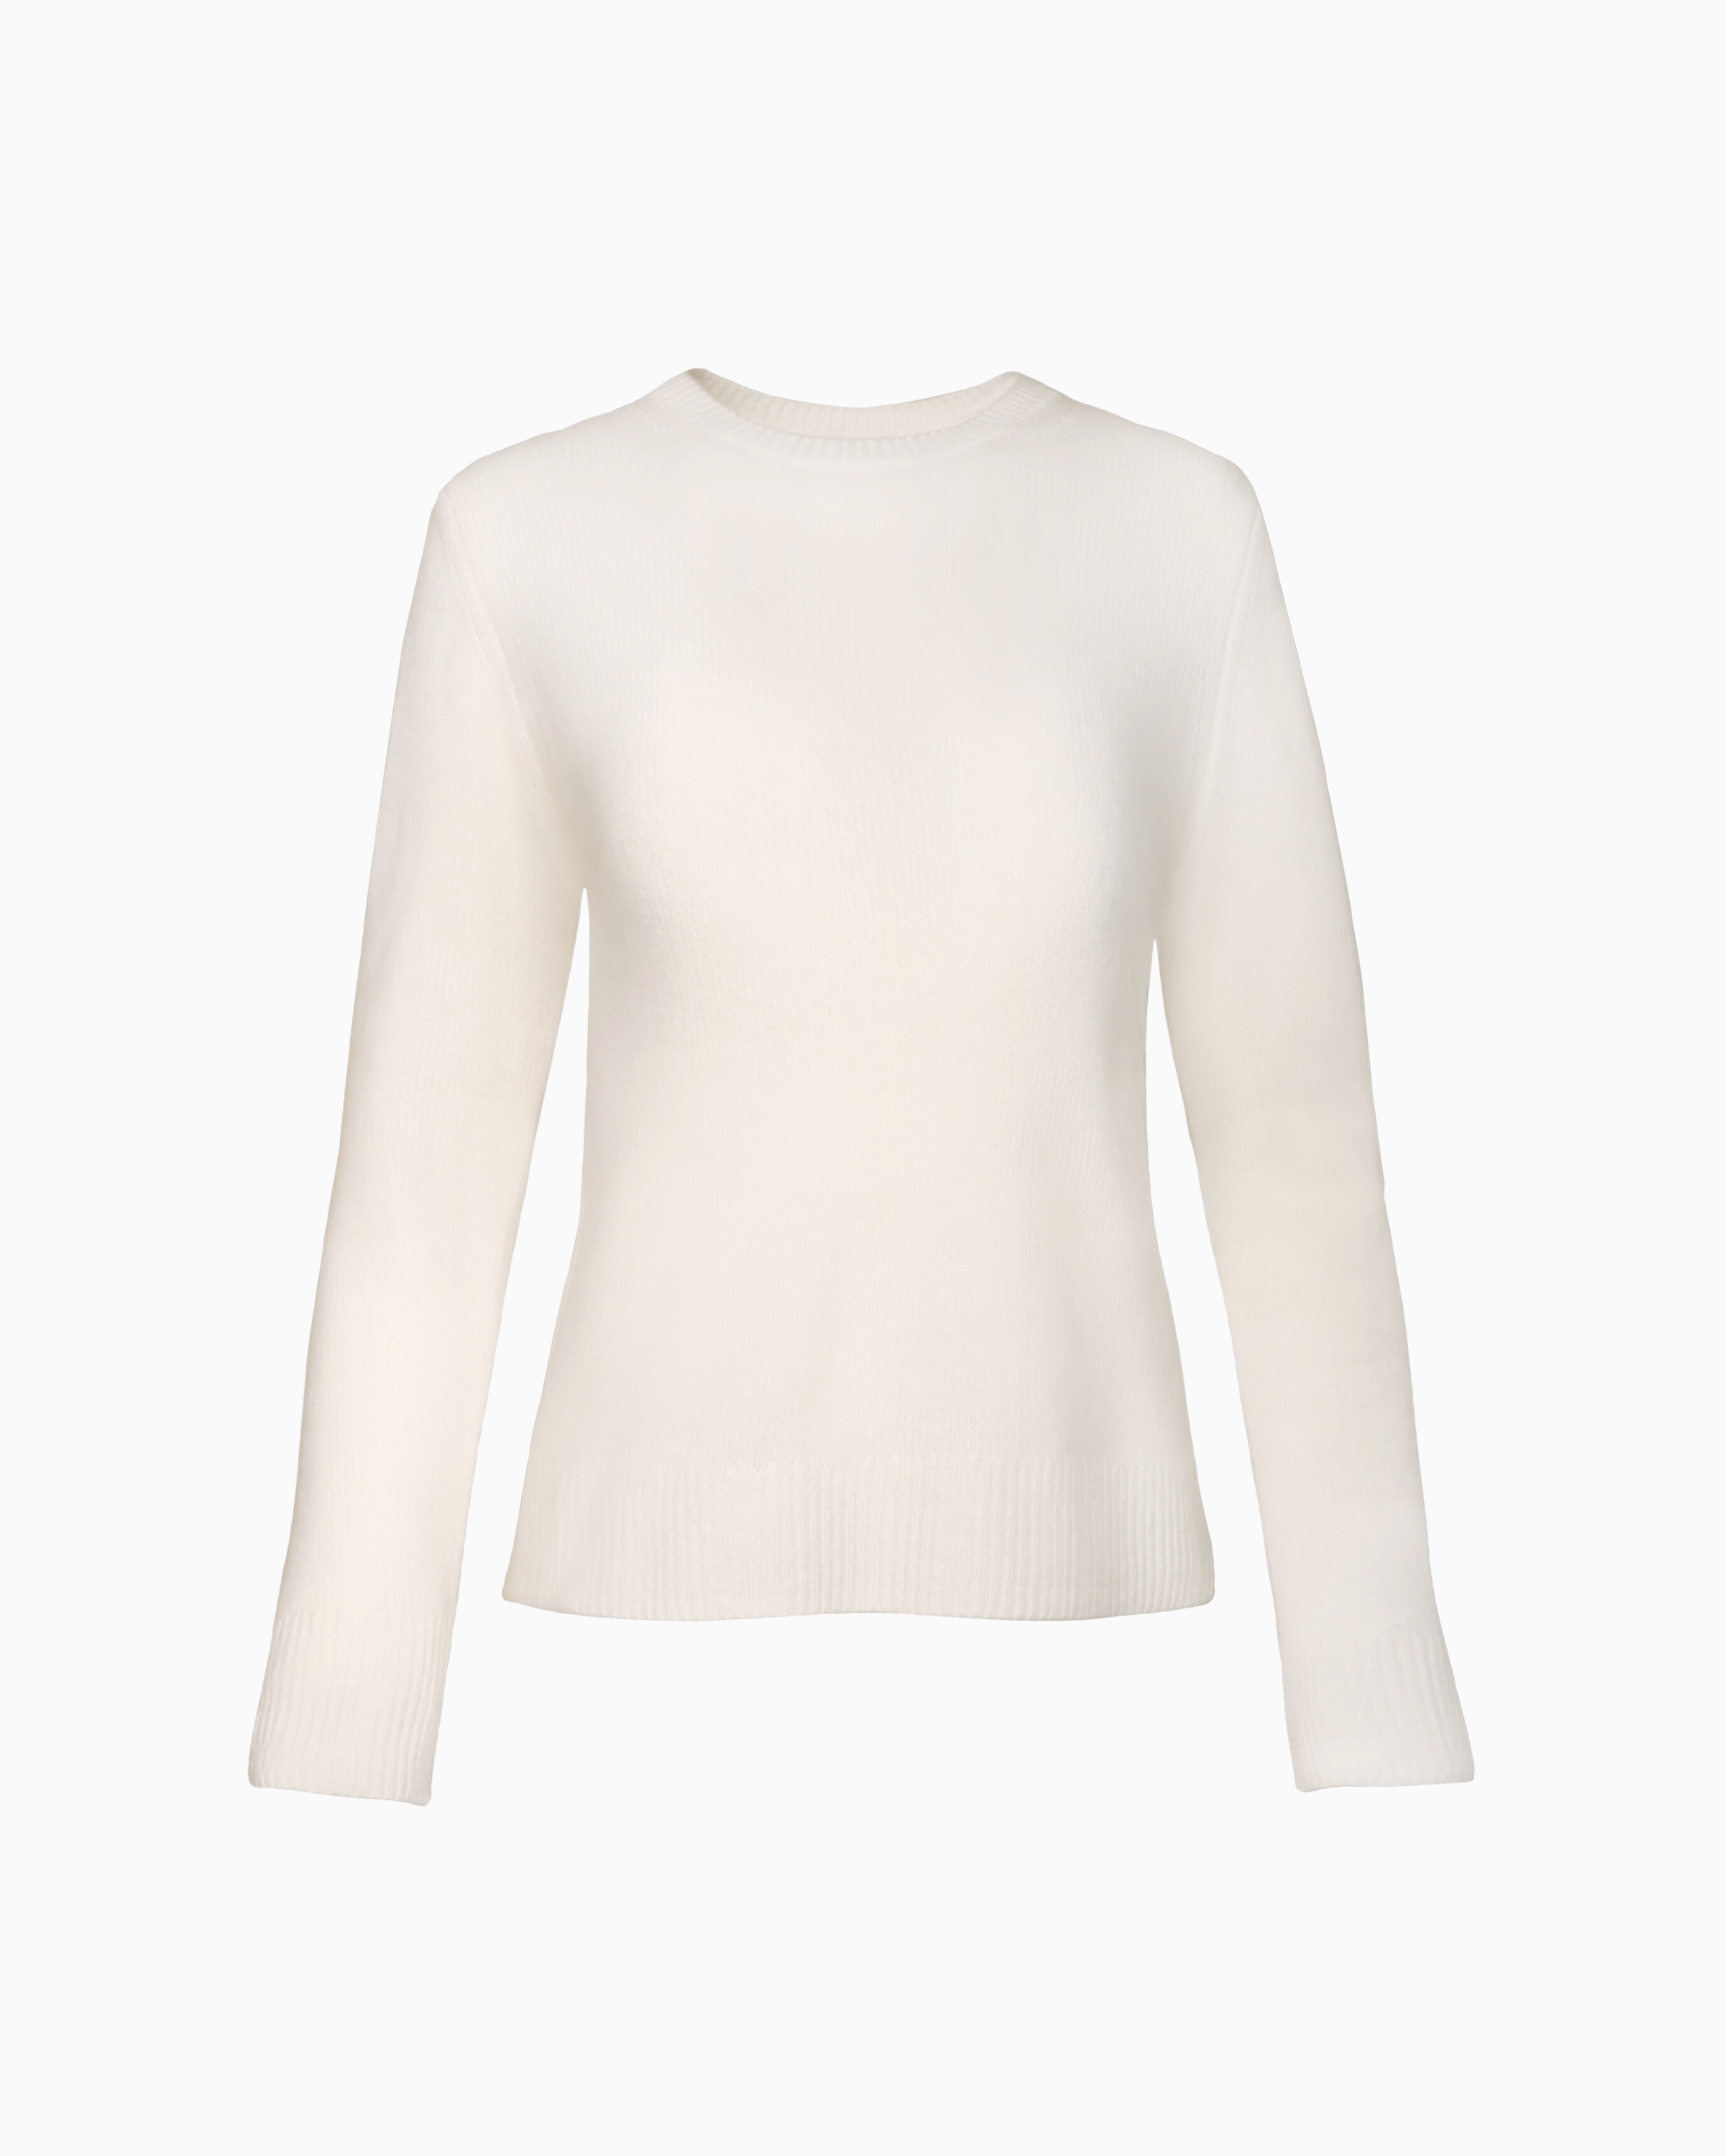 Vince Classic Cashmere Crewneck Sweater in Off White